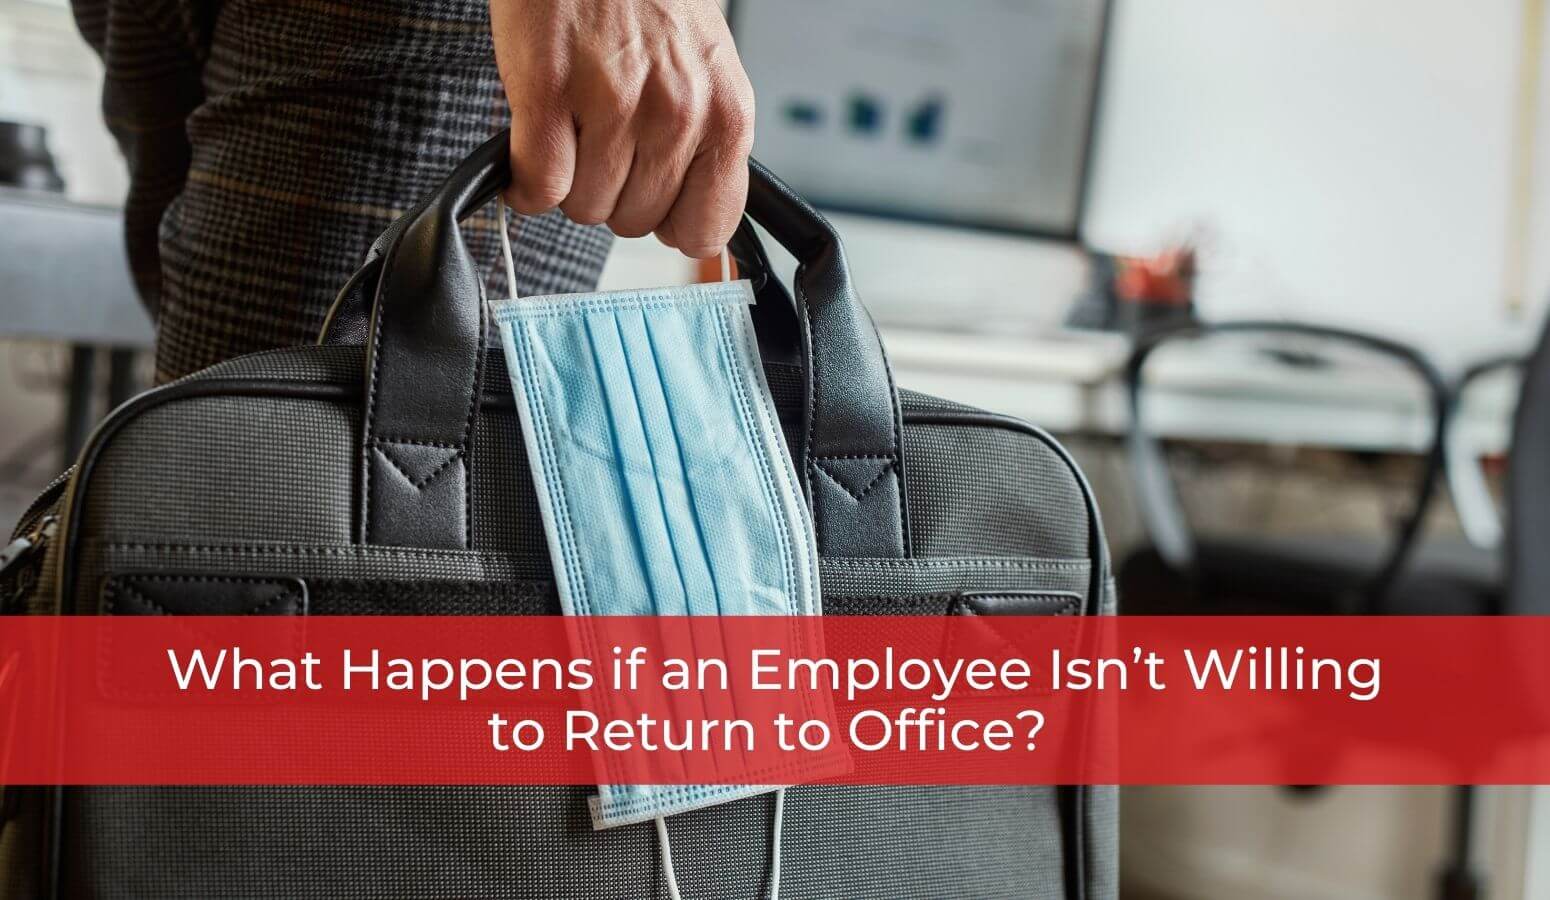 Featured image for “COVID-19 Return to Work – What Happens if an Employee Isn’t Willing to Return to Office?”